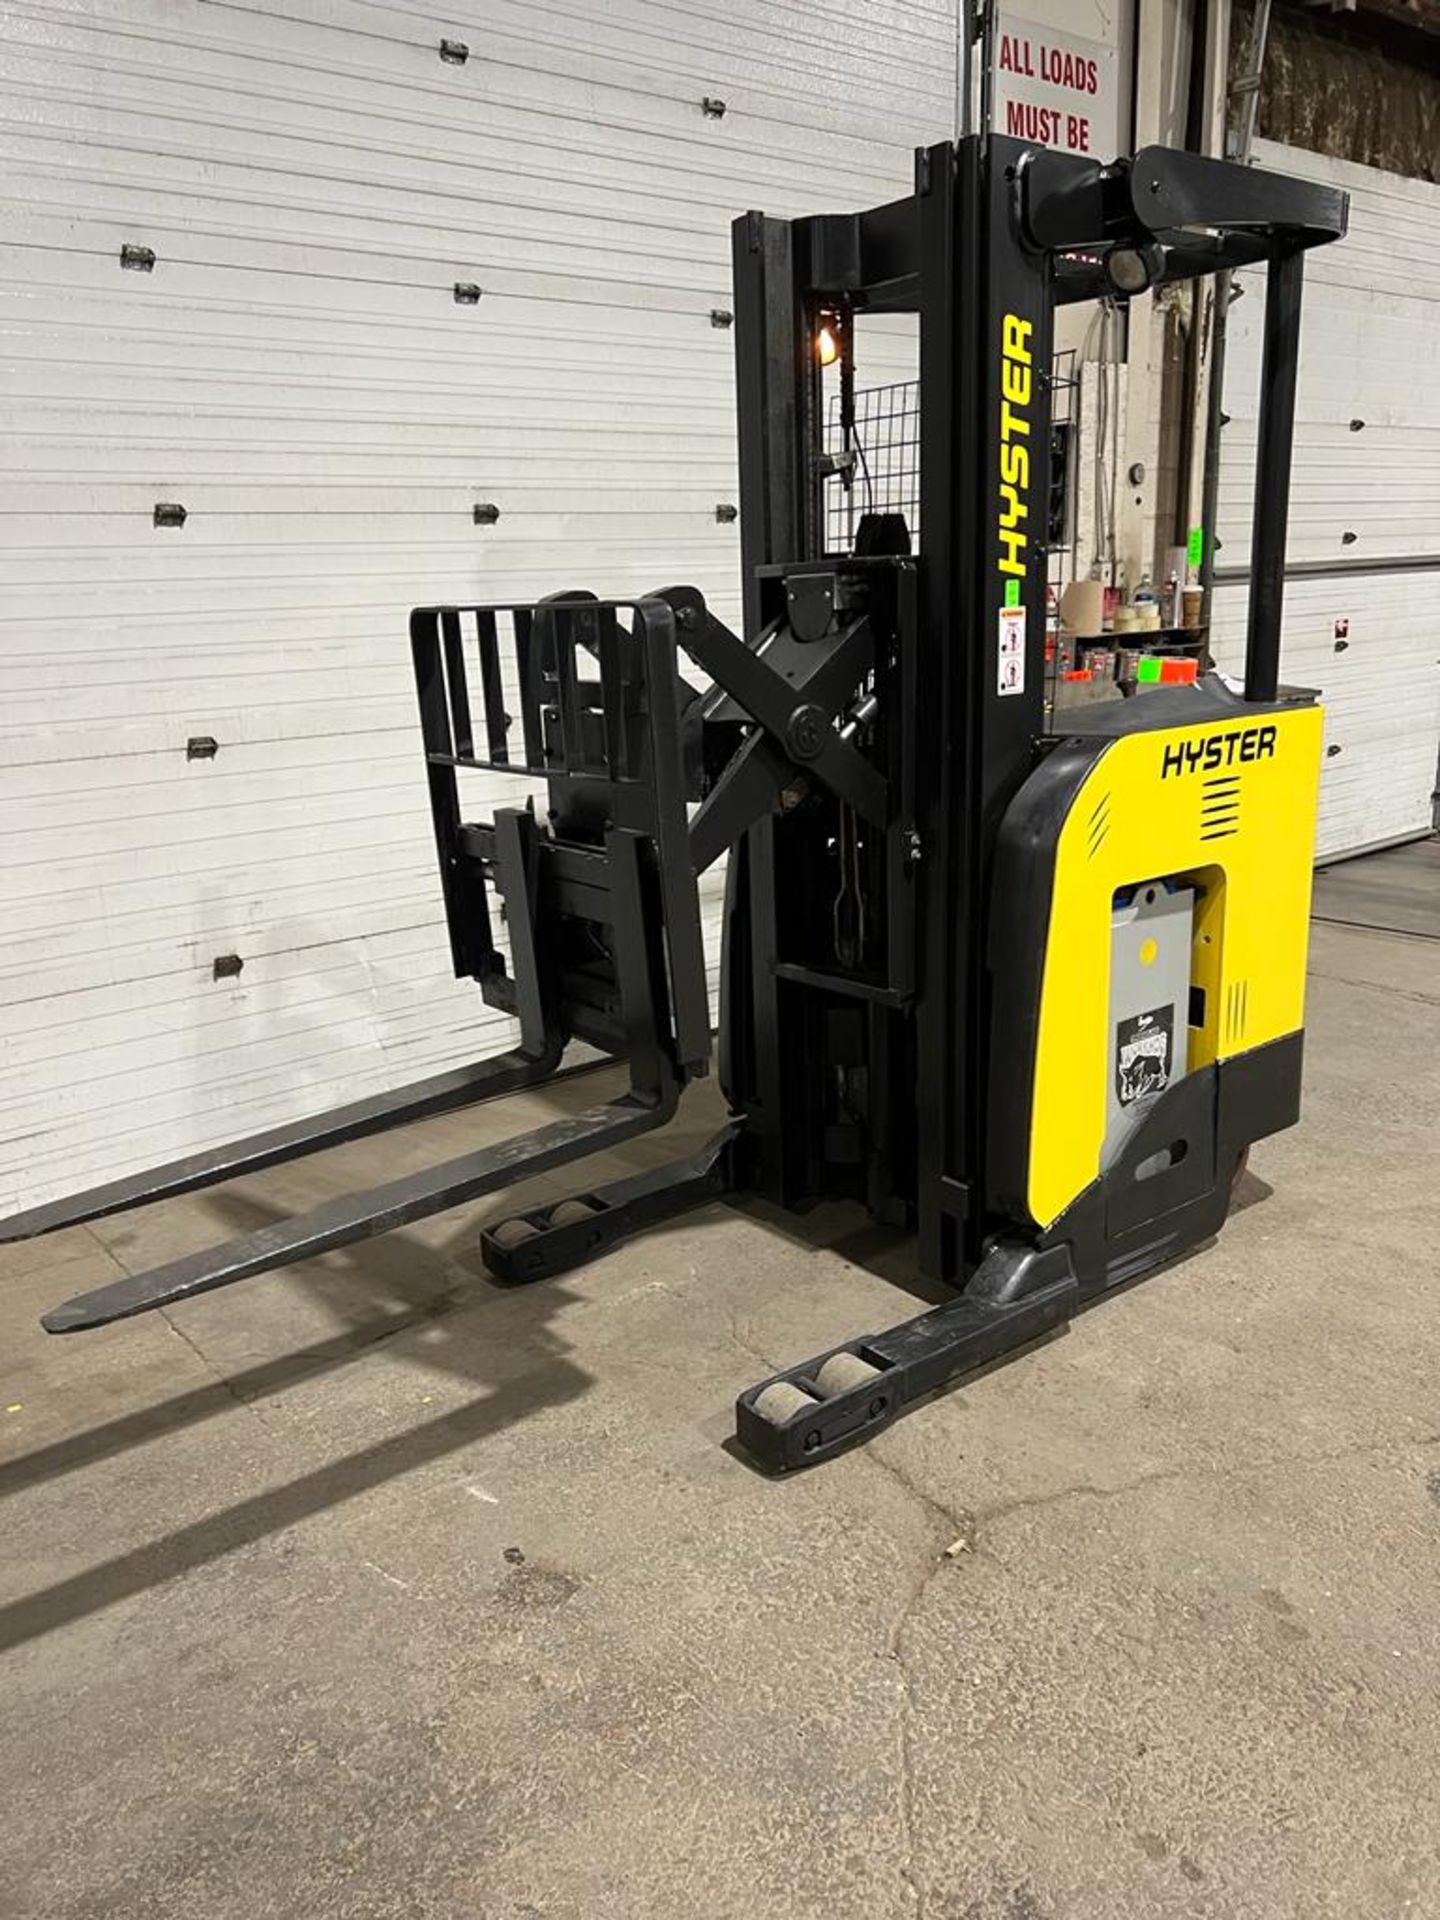 2017 Hyster Reach Truck 3,500lbs capacity electric with 24V battery with sideshift 3-stage Mast &